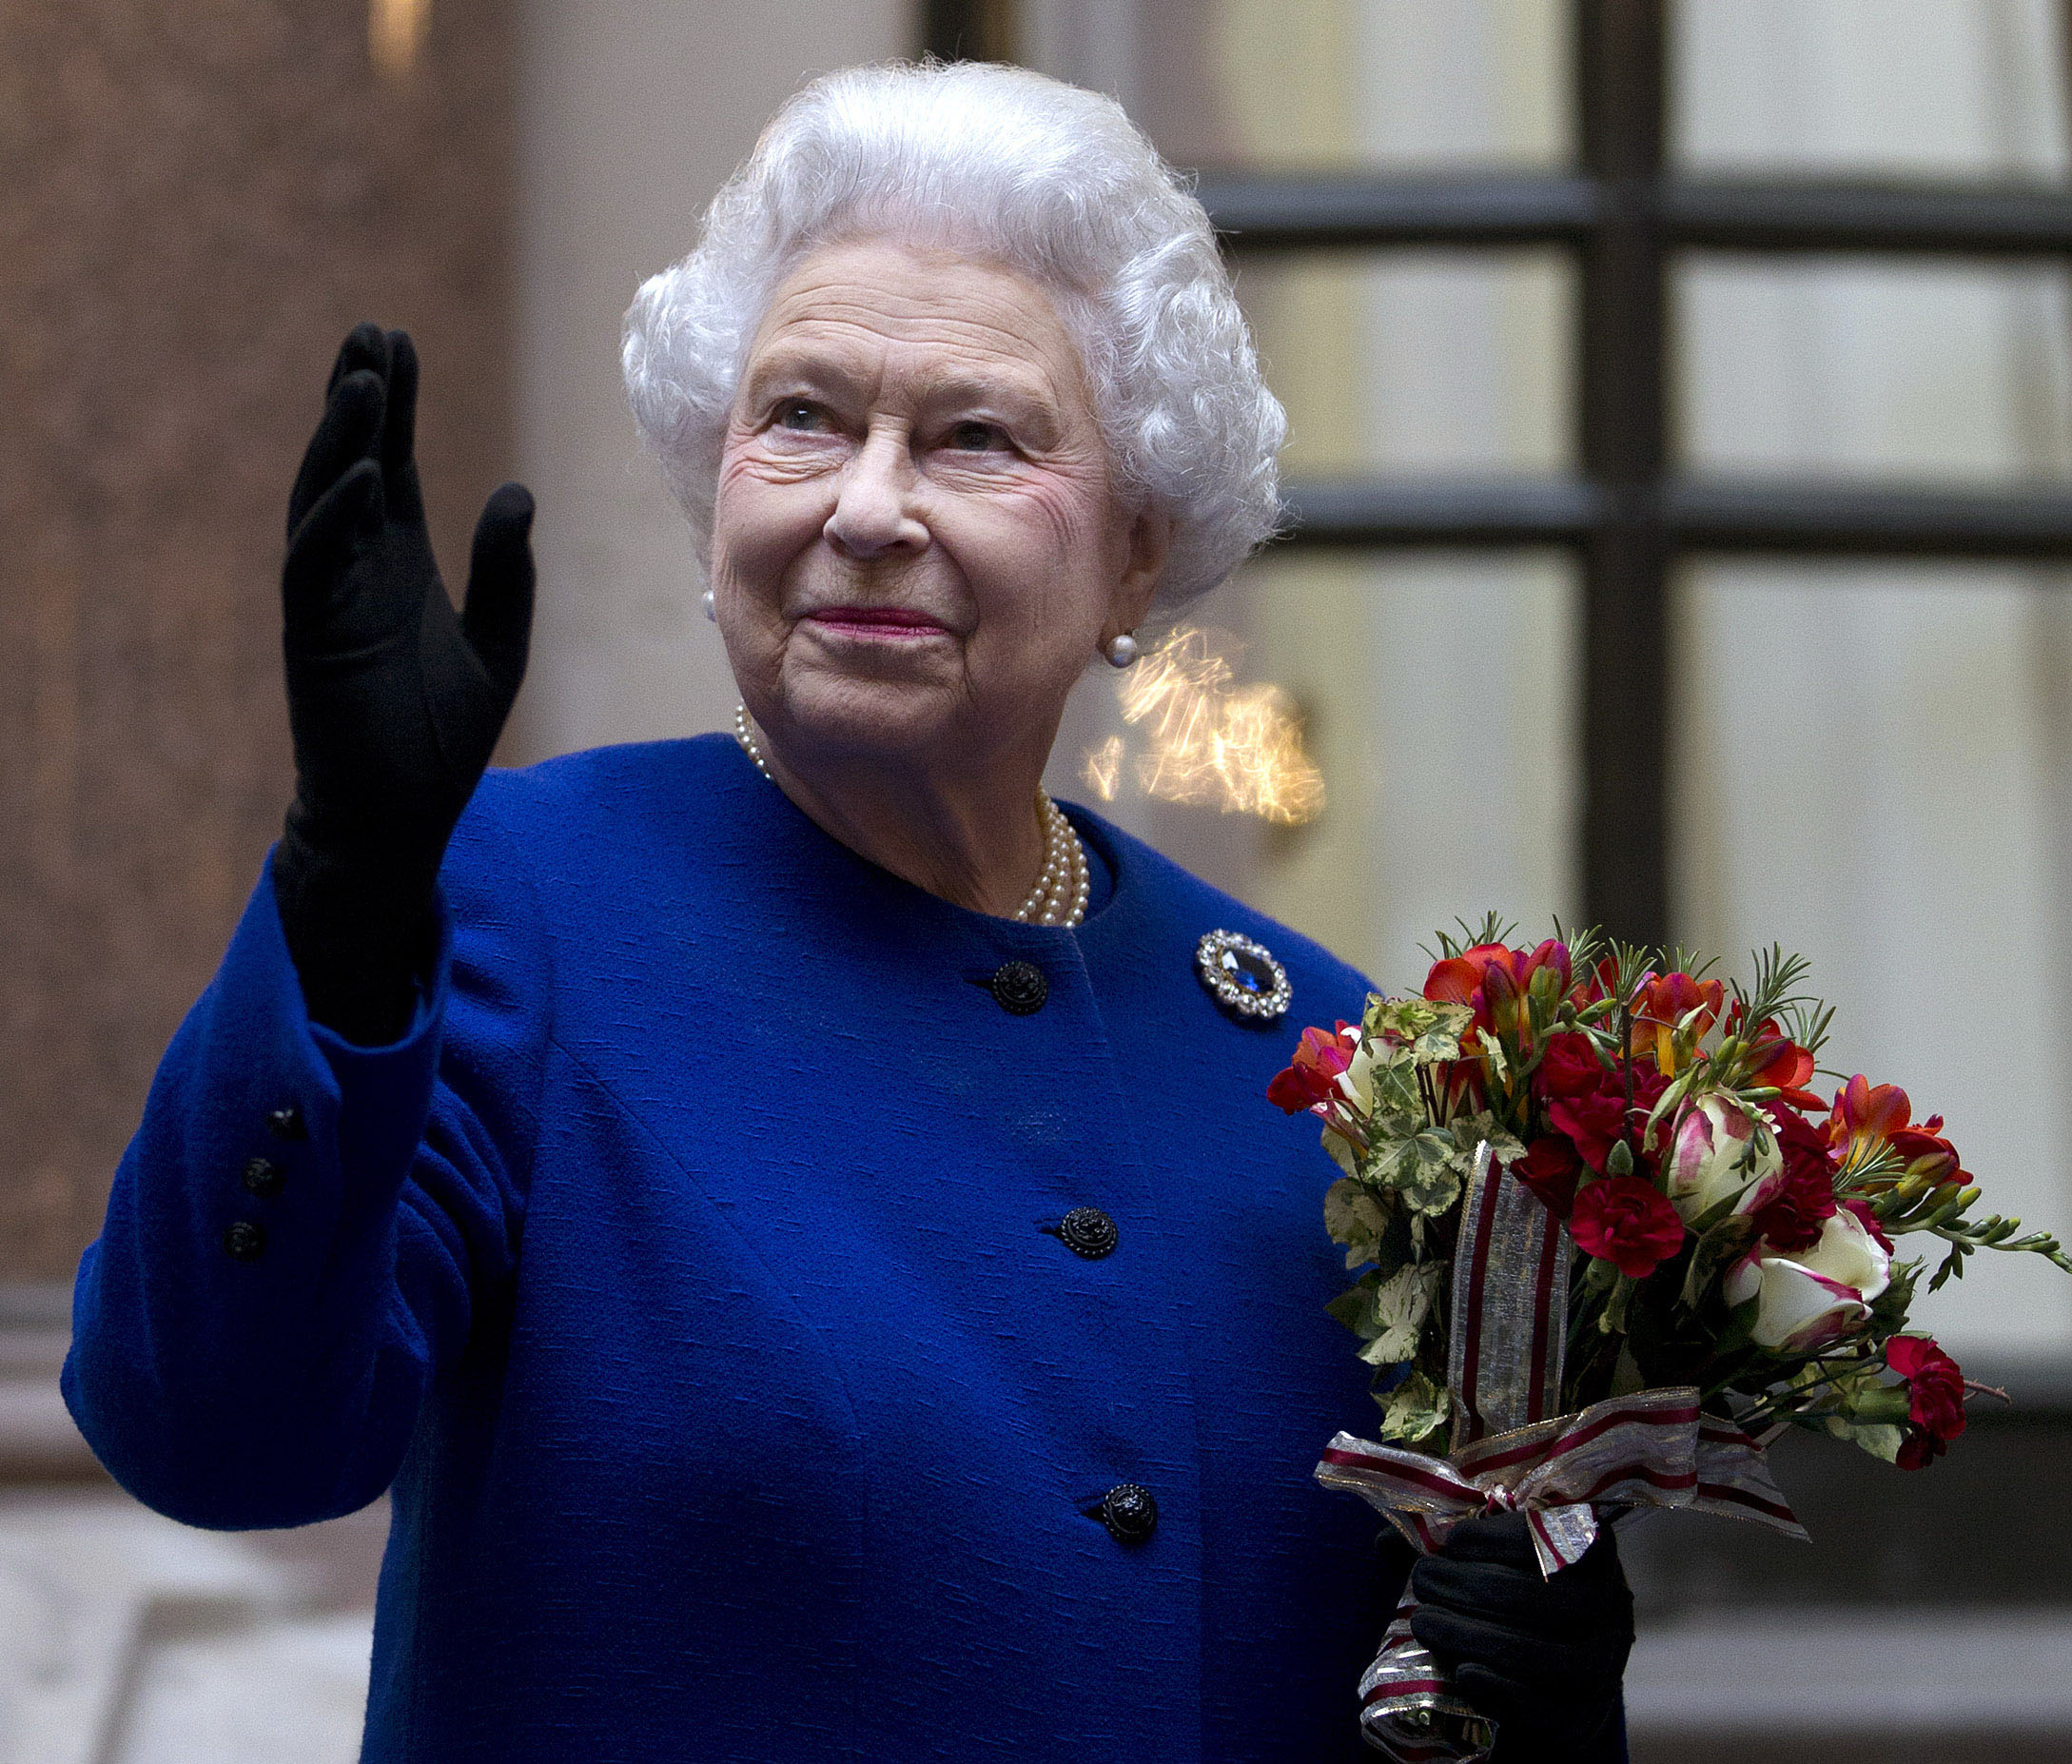 PHOTO: Britain's Queen Elizabeth II looks up and waves to members of staff of The Foreign and Commonwealth Office as she ends an official visit, which is part of her Jubilee celebrations in London, Dec. 18, 2012.